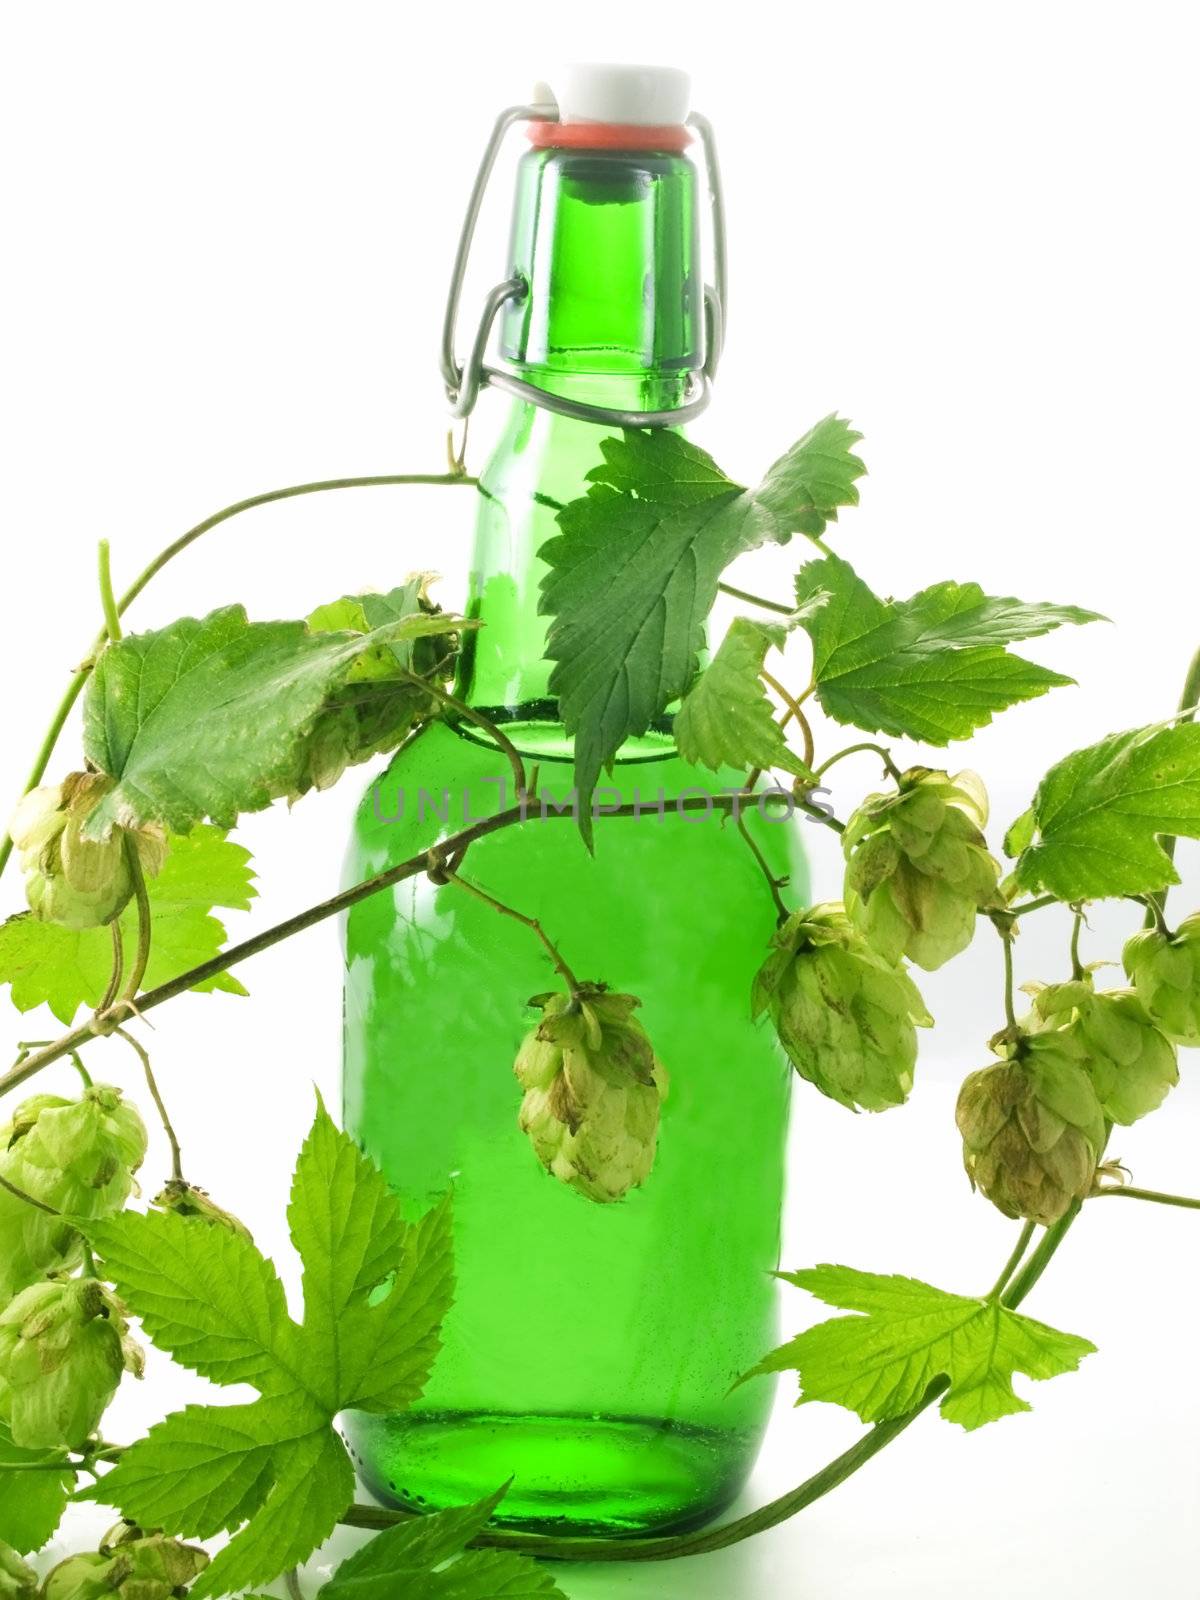 Close-up of Beer bottle isolated on white background